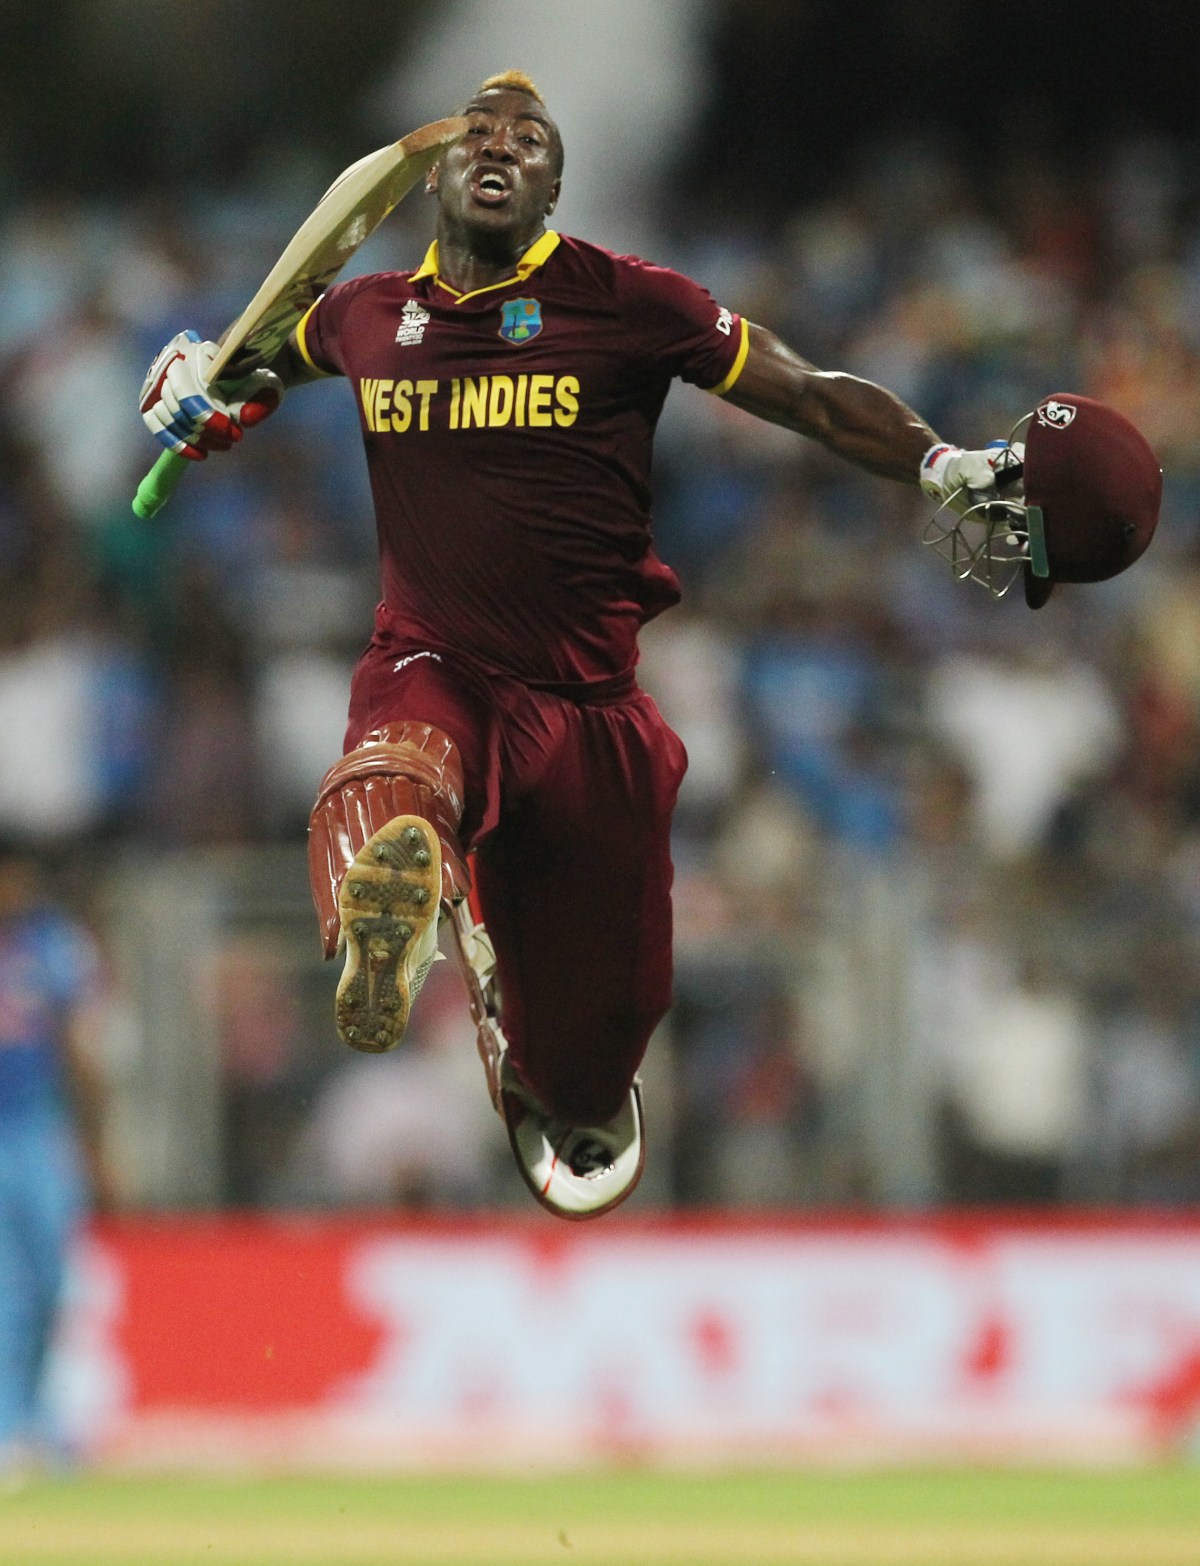 West Indies Andre Russell celebrates after his team's seven wicket win over India during their ICC World Twenty20 2016 cricket semifinal match at Wankhede stadium in Mumbai, India,Thursday, March 31, 2016.(AP Photo/Rafiq Maqbool)